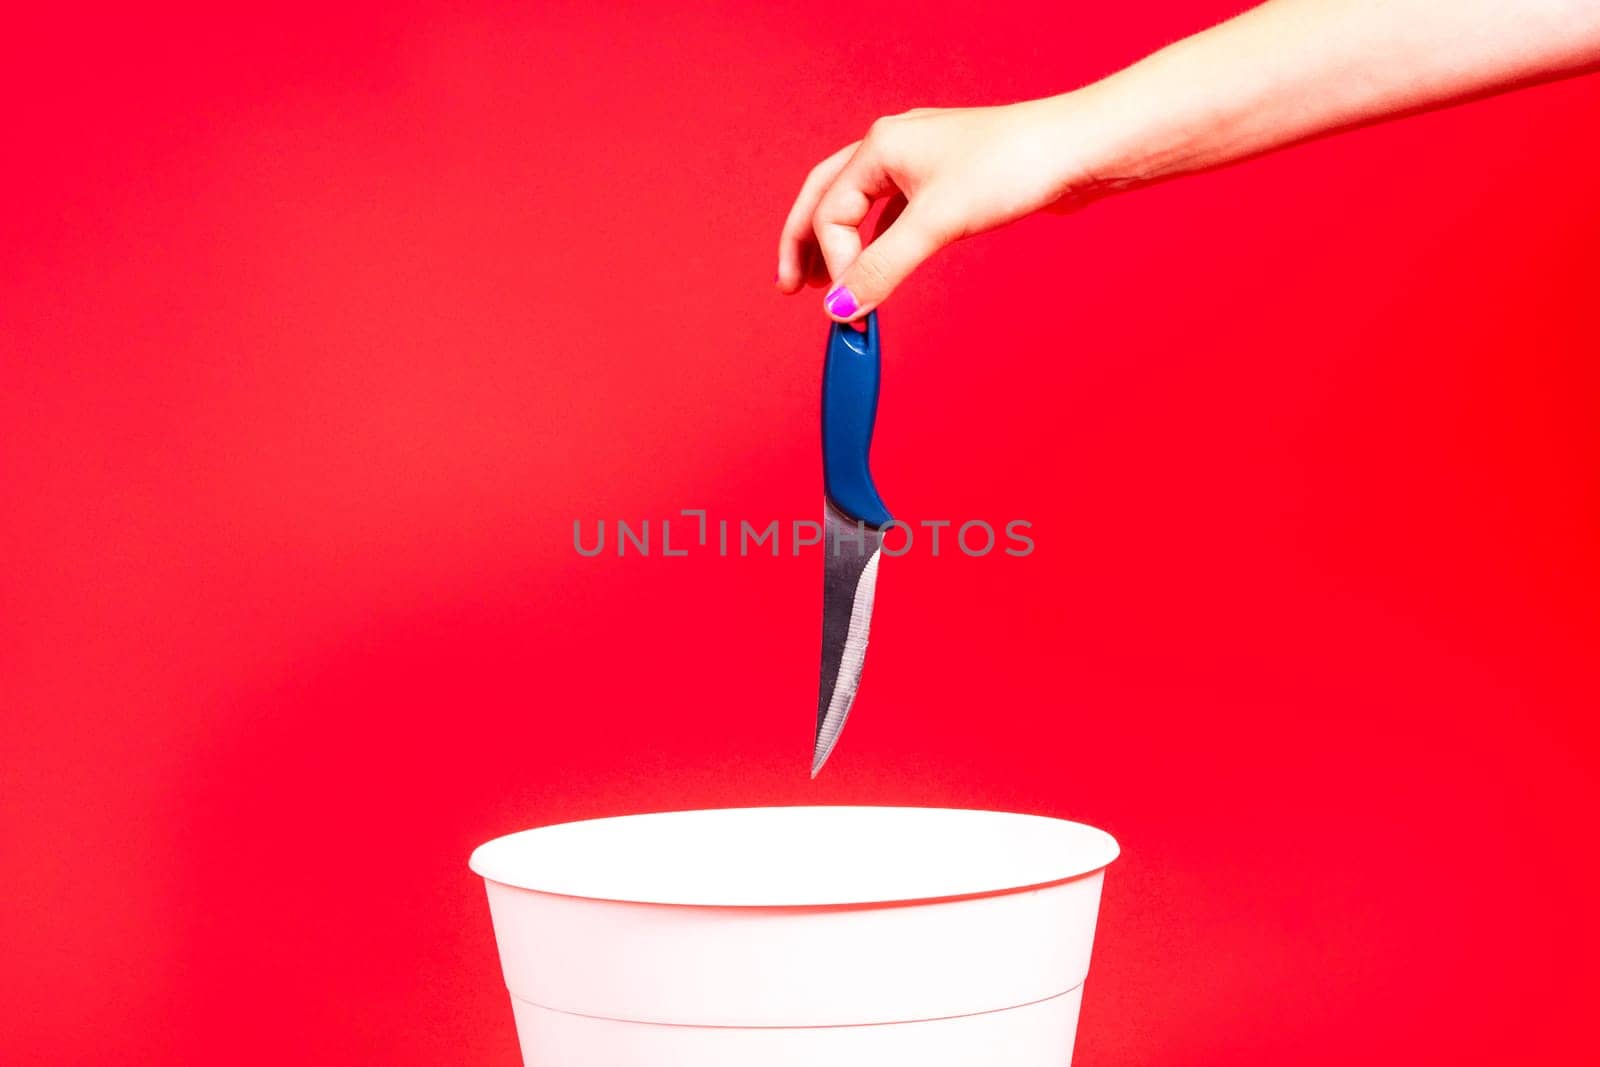 The knife is thrown into the trash basket. Red isolated background by Zelenin